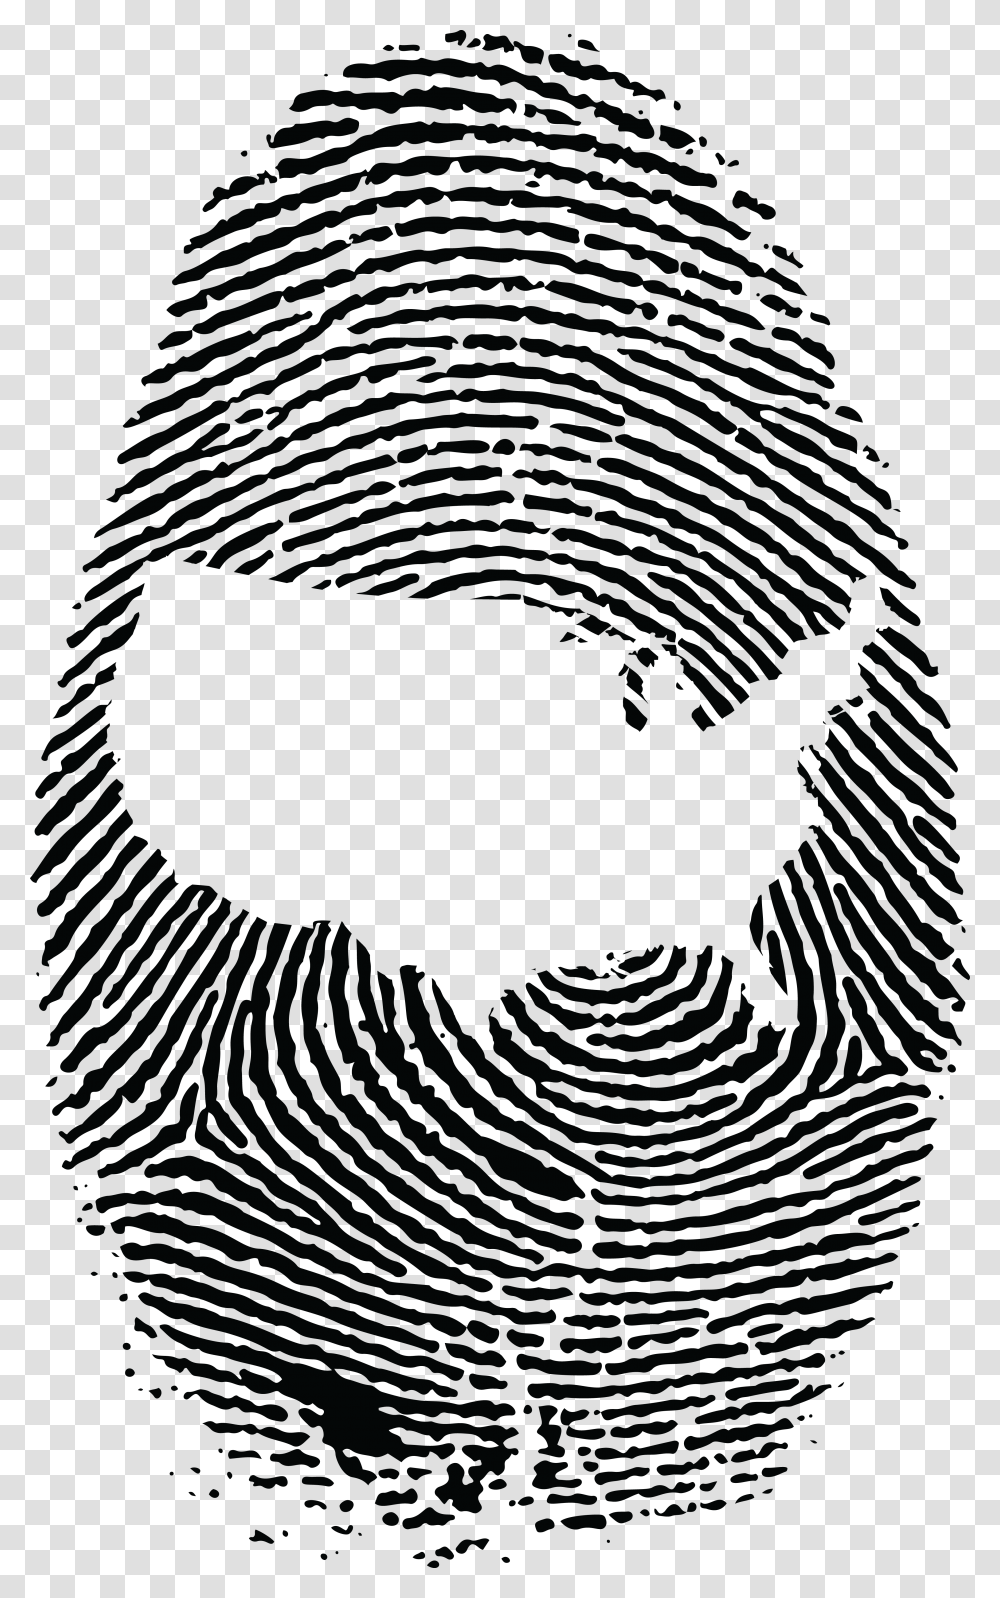 Free Clipart Of A Thumb Print With The United States Fibonacci Sequence In Fingerprint, Spider Web, Apparel Transparent Png